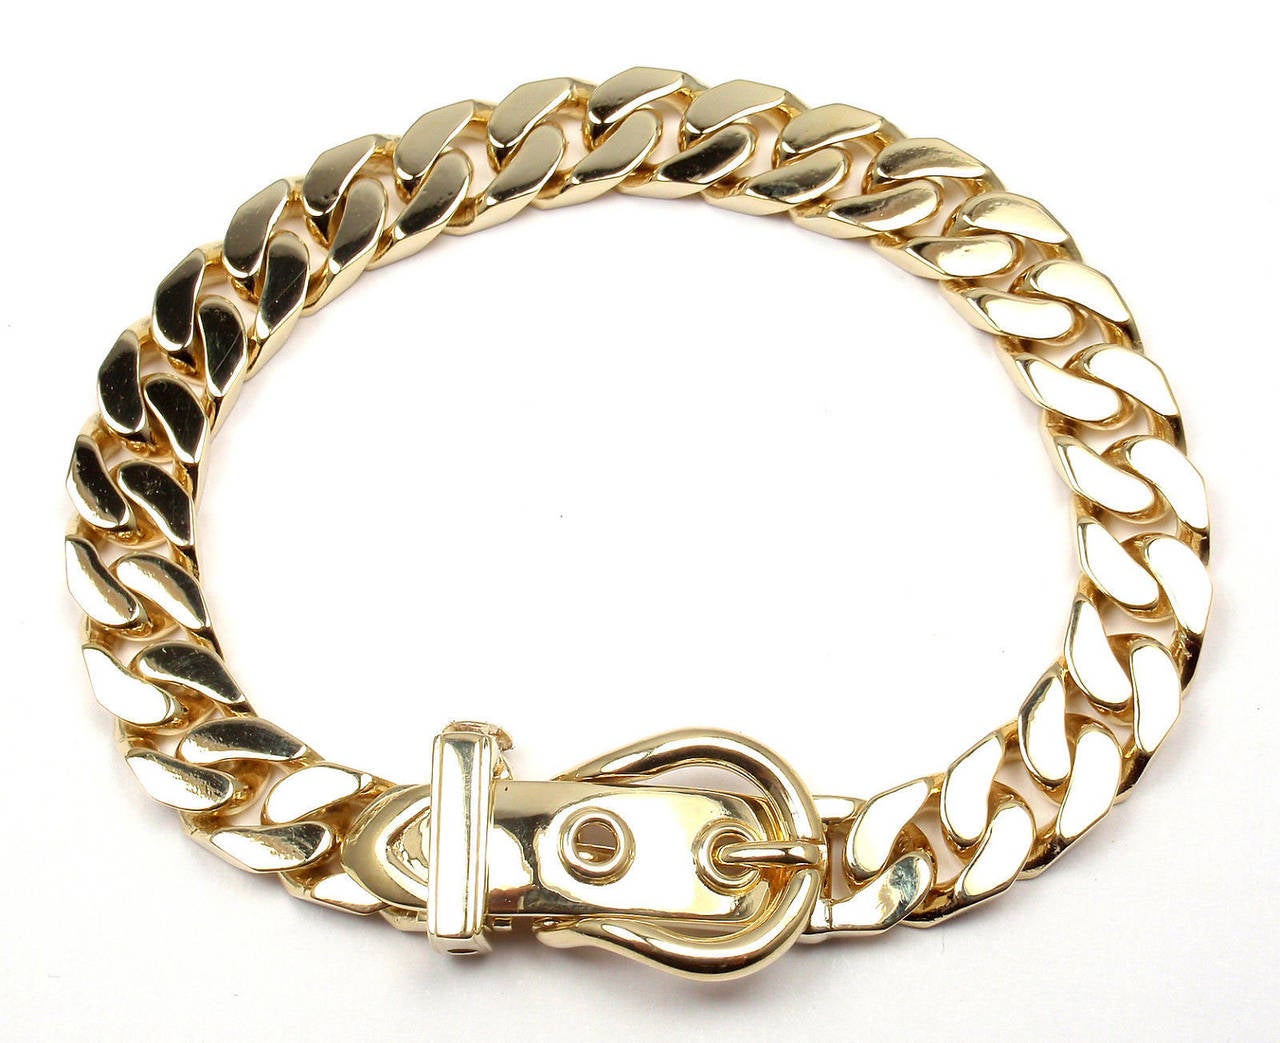 18k Yellow Gold Curb Link Chain Large Buckle Bracelet by Hermes. 

Details: 
Length: 8